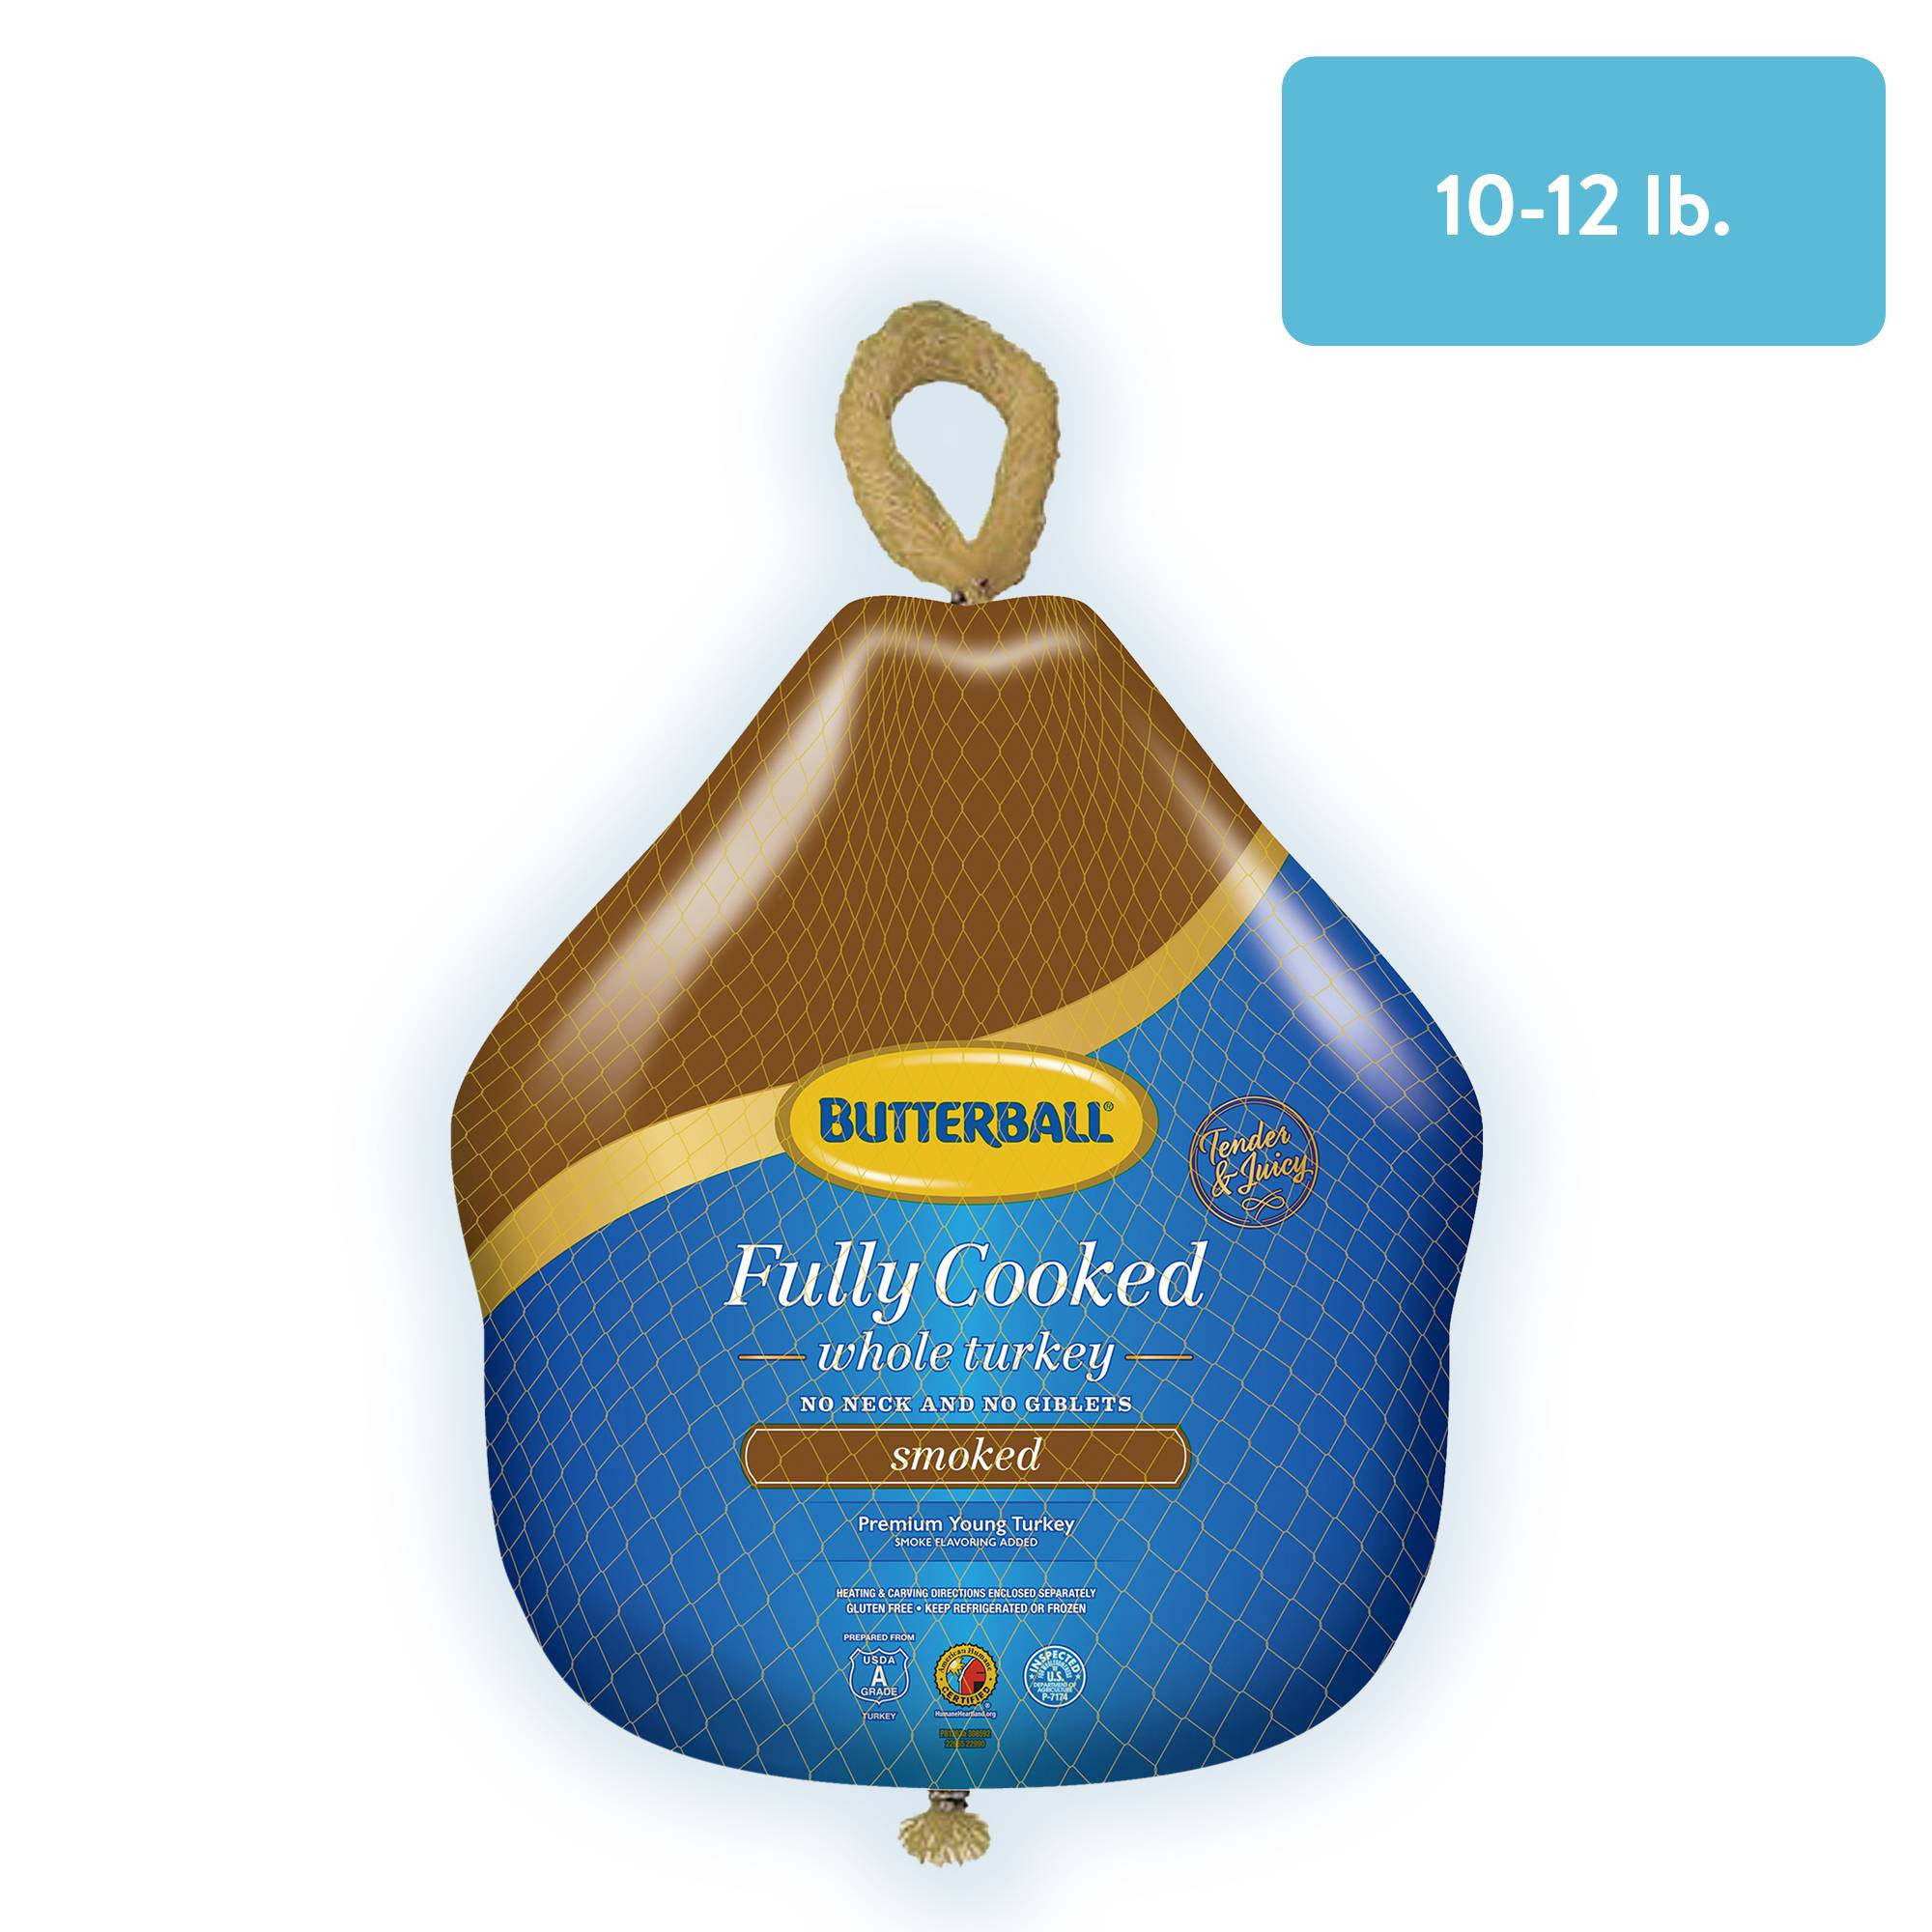 Whole Turkey Walmart
 Butterball Fully Cooked Smoked Whole Turkey 10 14 5lb